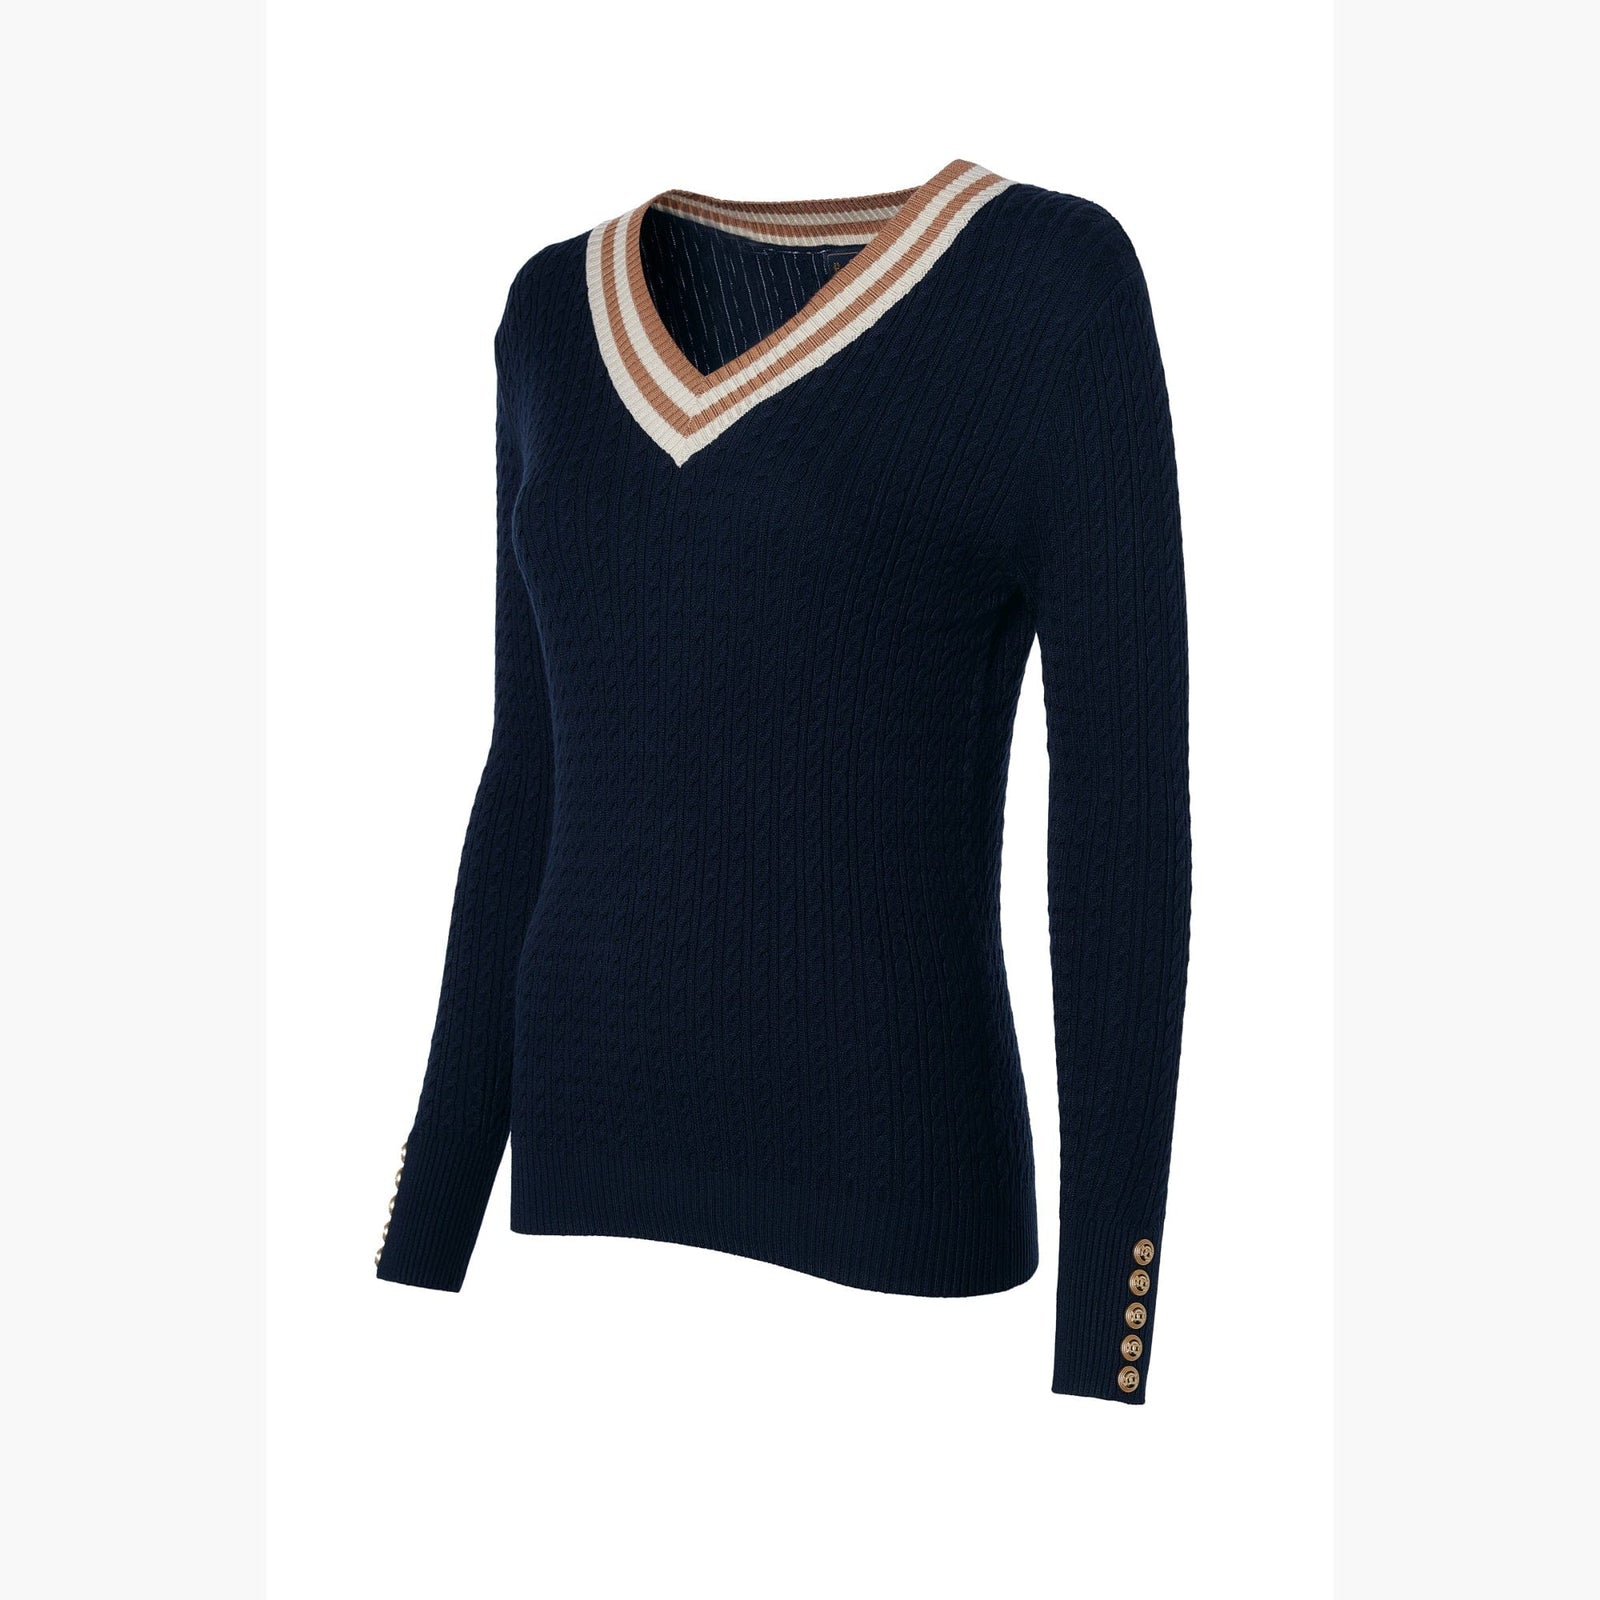 Holland Cooper Zoe Knit in Ink Navy